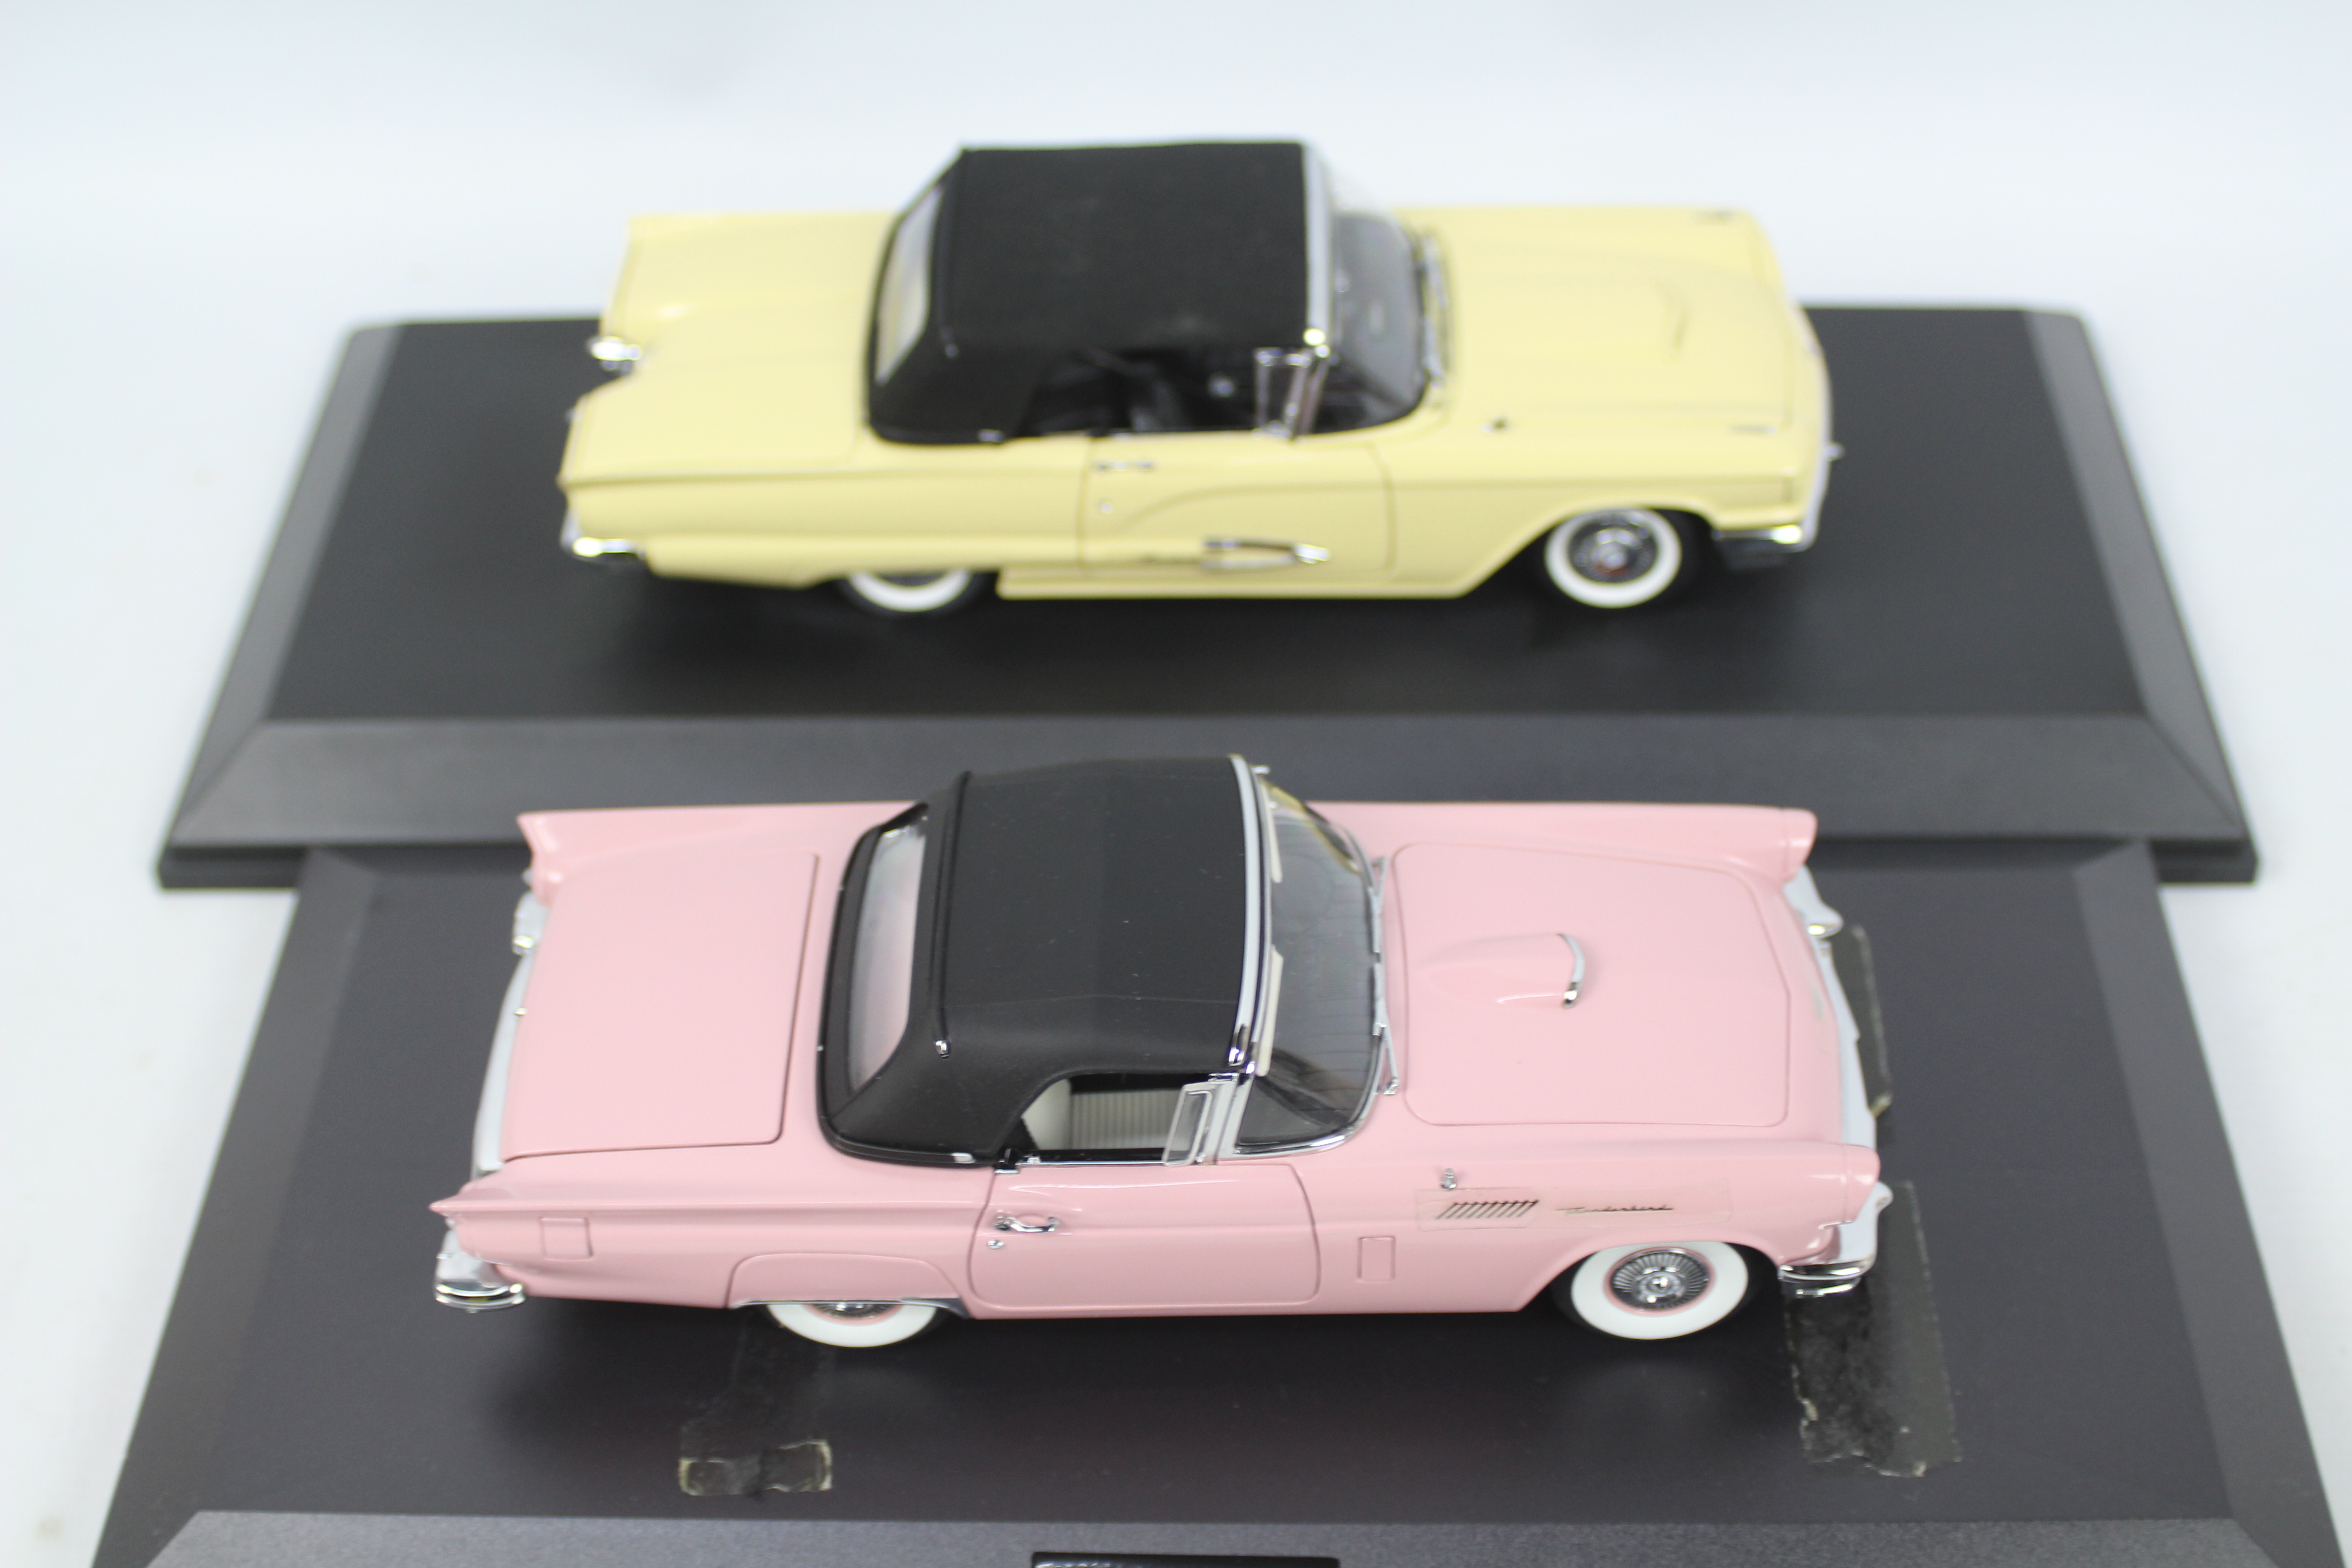 Danbury Mint - 2 x Ford Thunderbird models in 1:24 scale, - Image 5 of 5